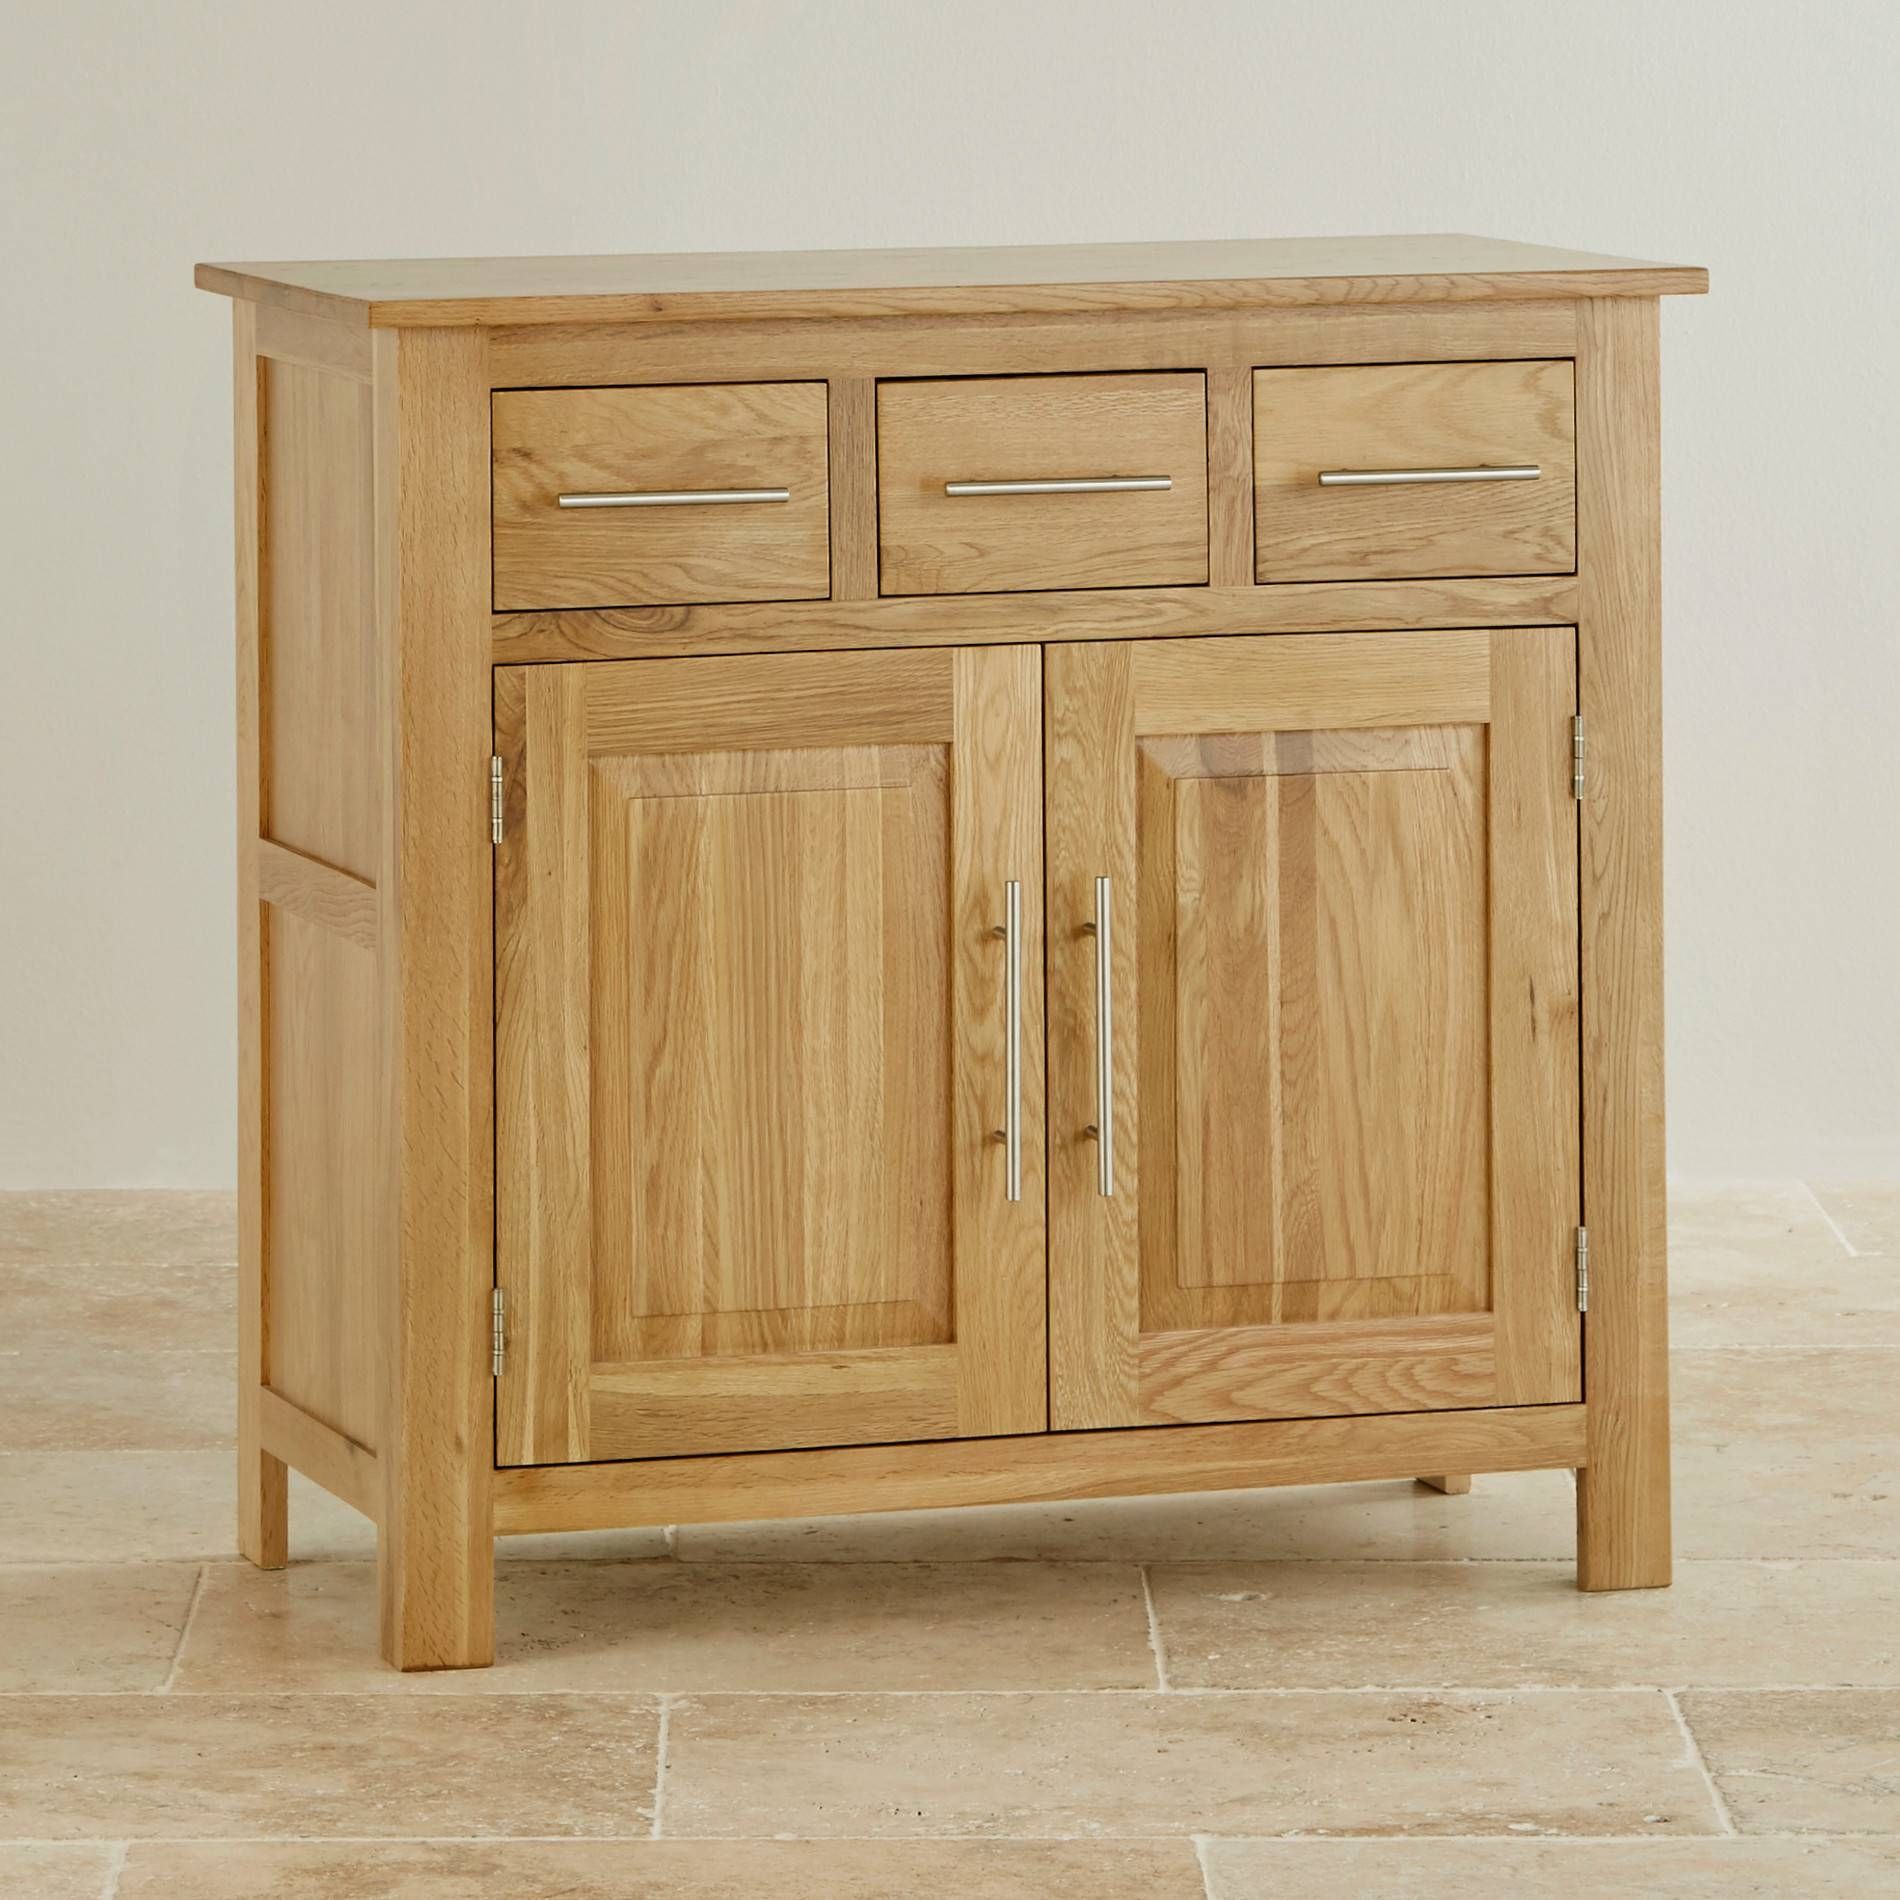 The Rivermead Range – Natural Solid Oak Furniture Throughout Most Popular Chunky Oak Sideboards (View 15 of 15)